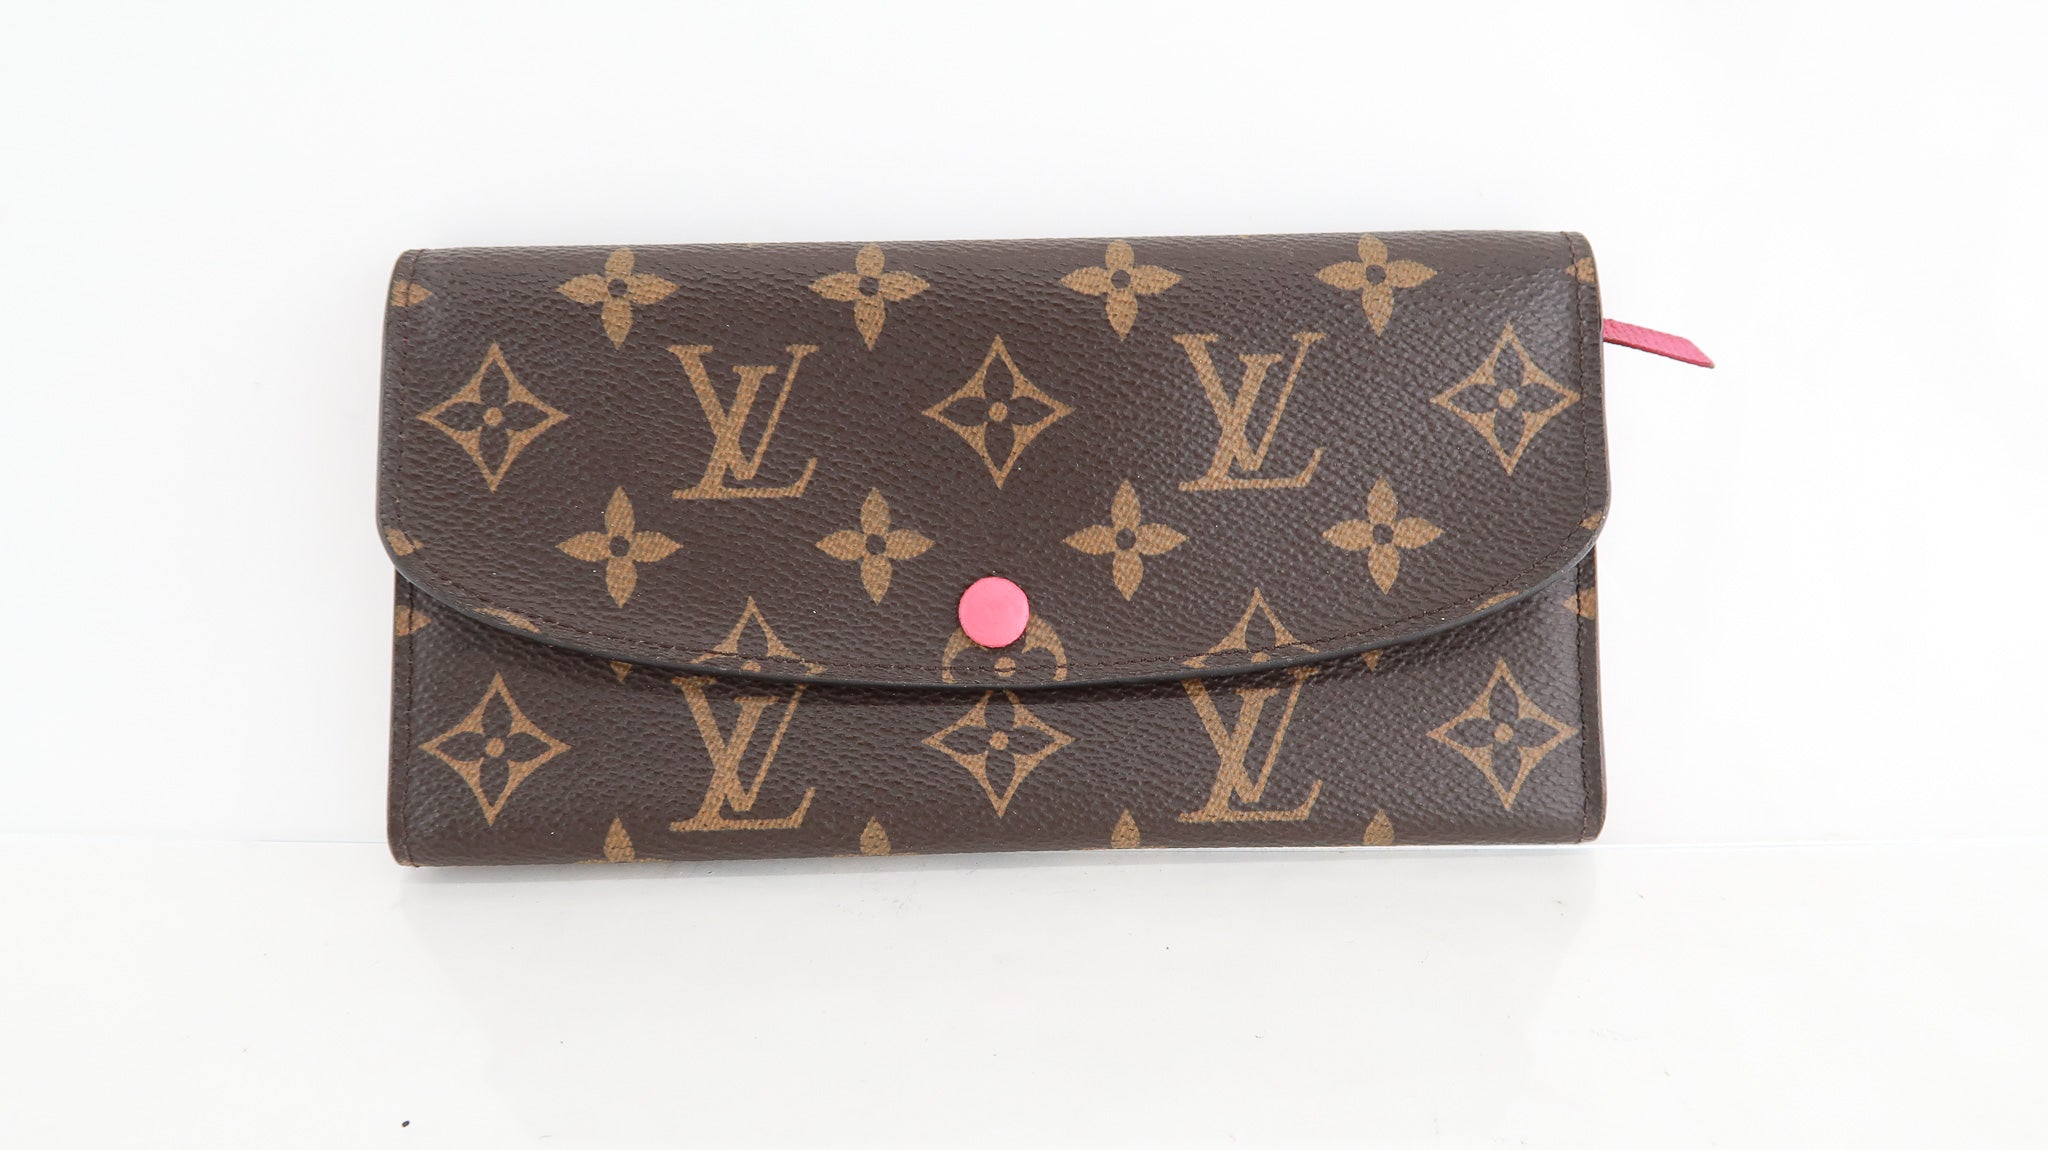 Louis Vuitton Emilie Wallet Monogram Fuchsia in Coated Canvas with